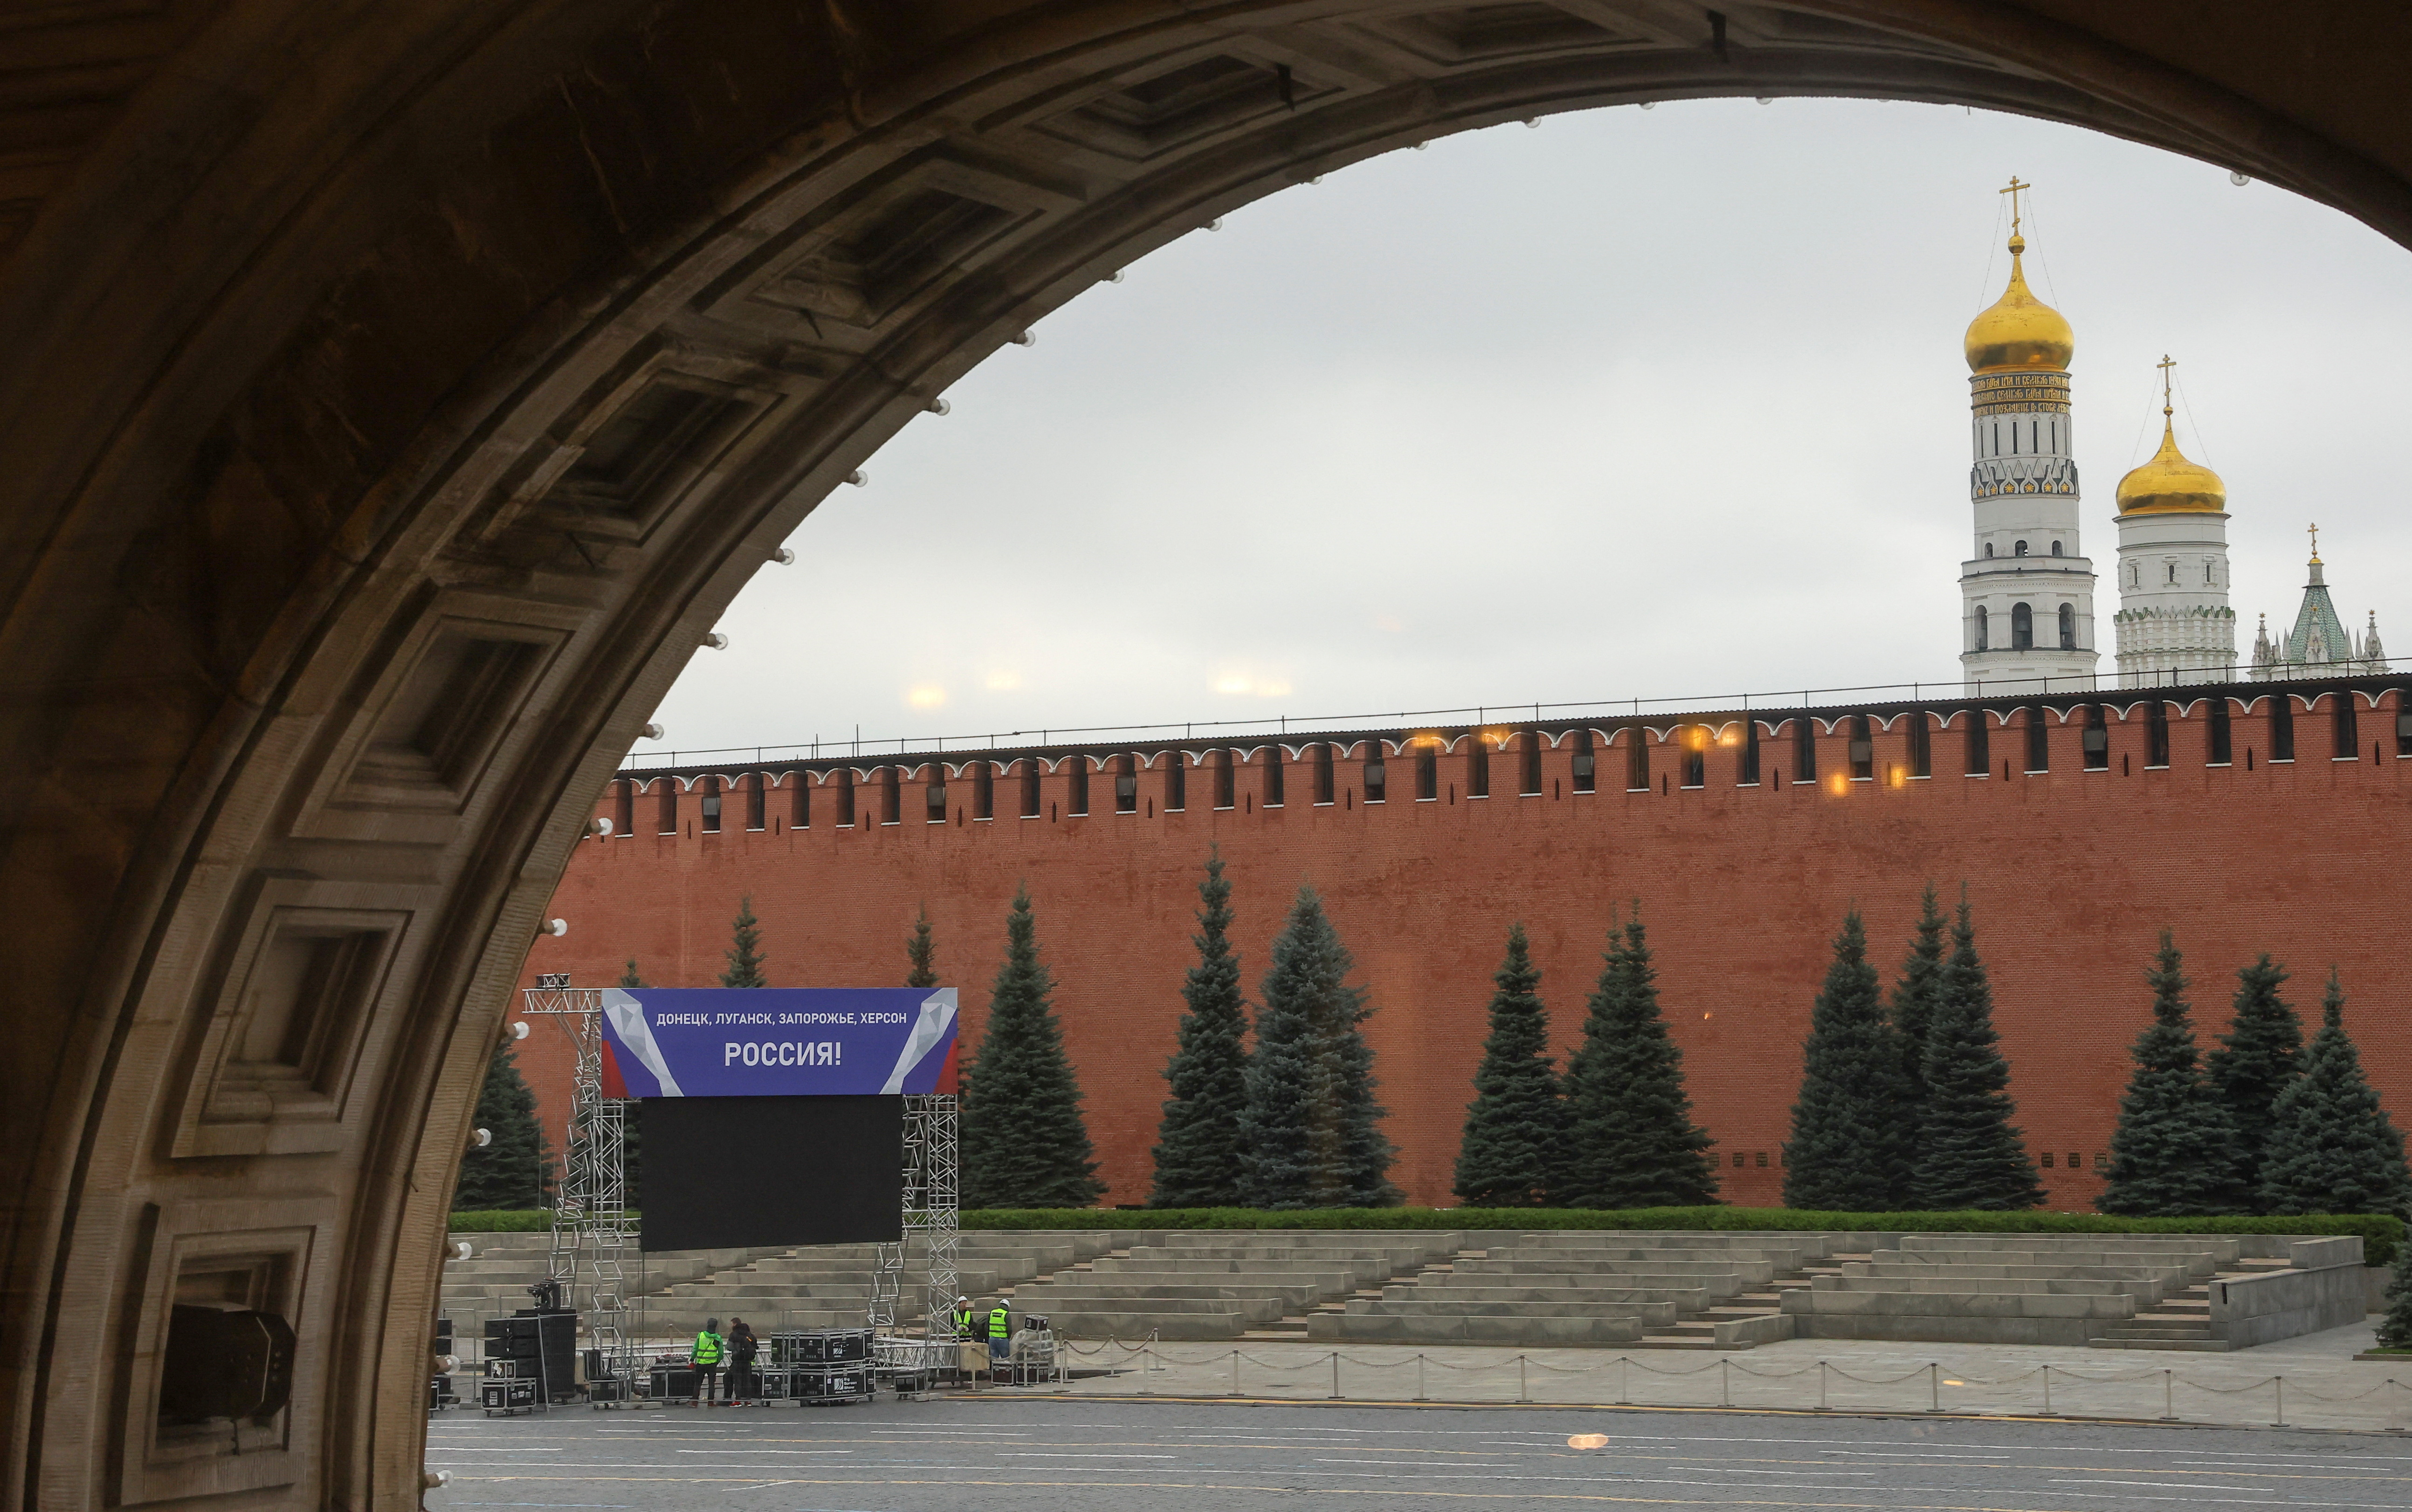 A view shows a banner on a construction in Red Square in Moscow